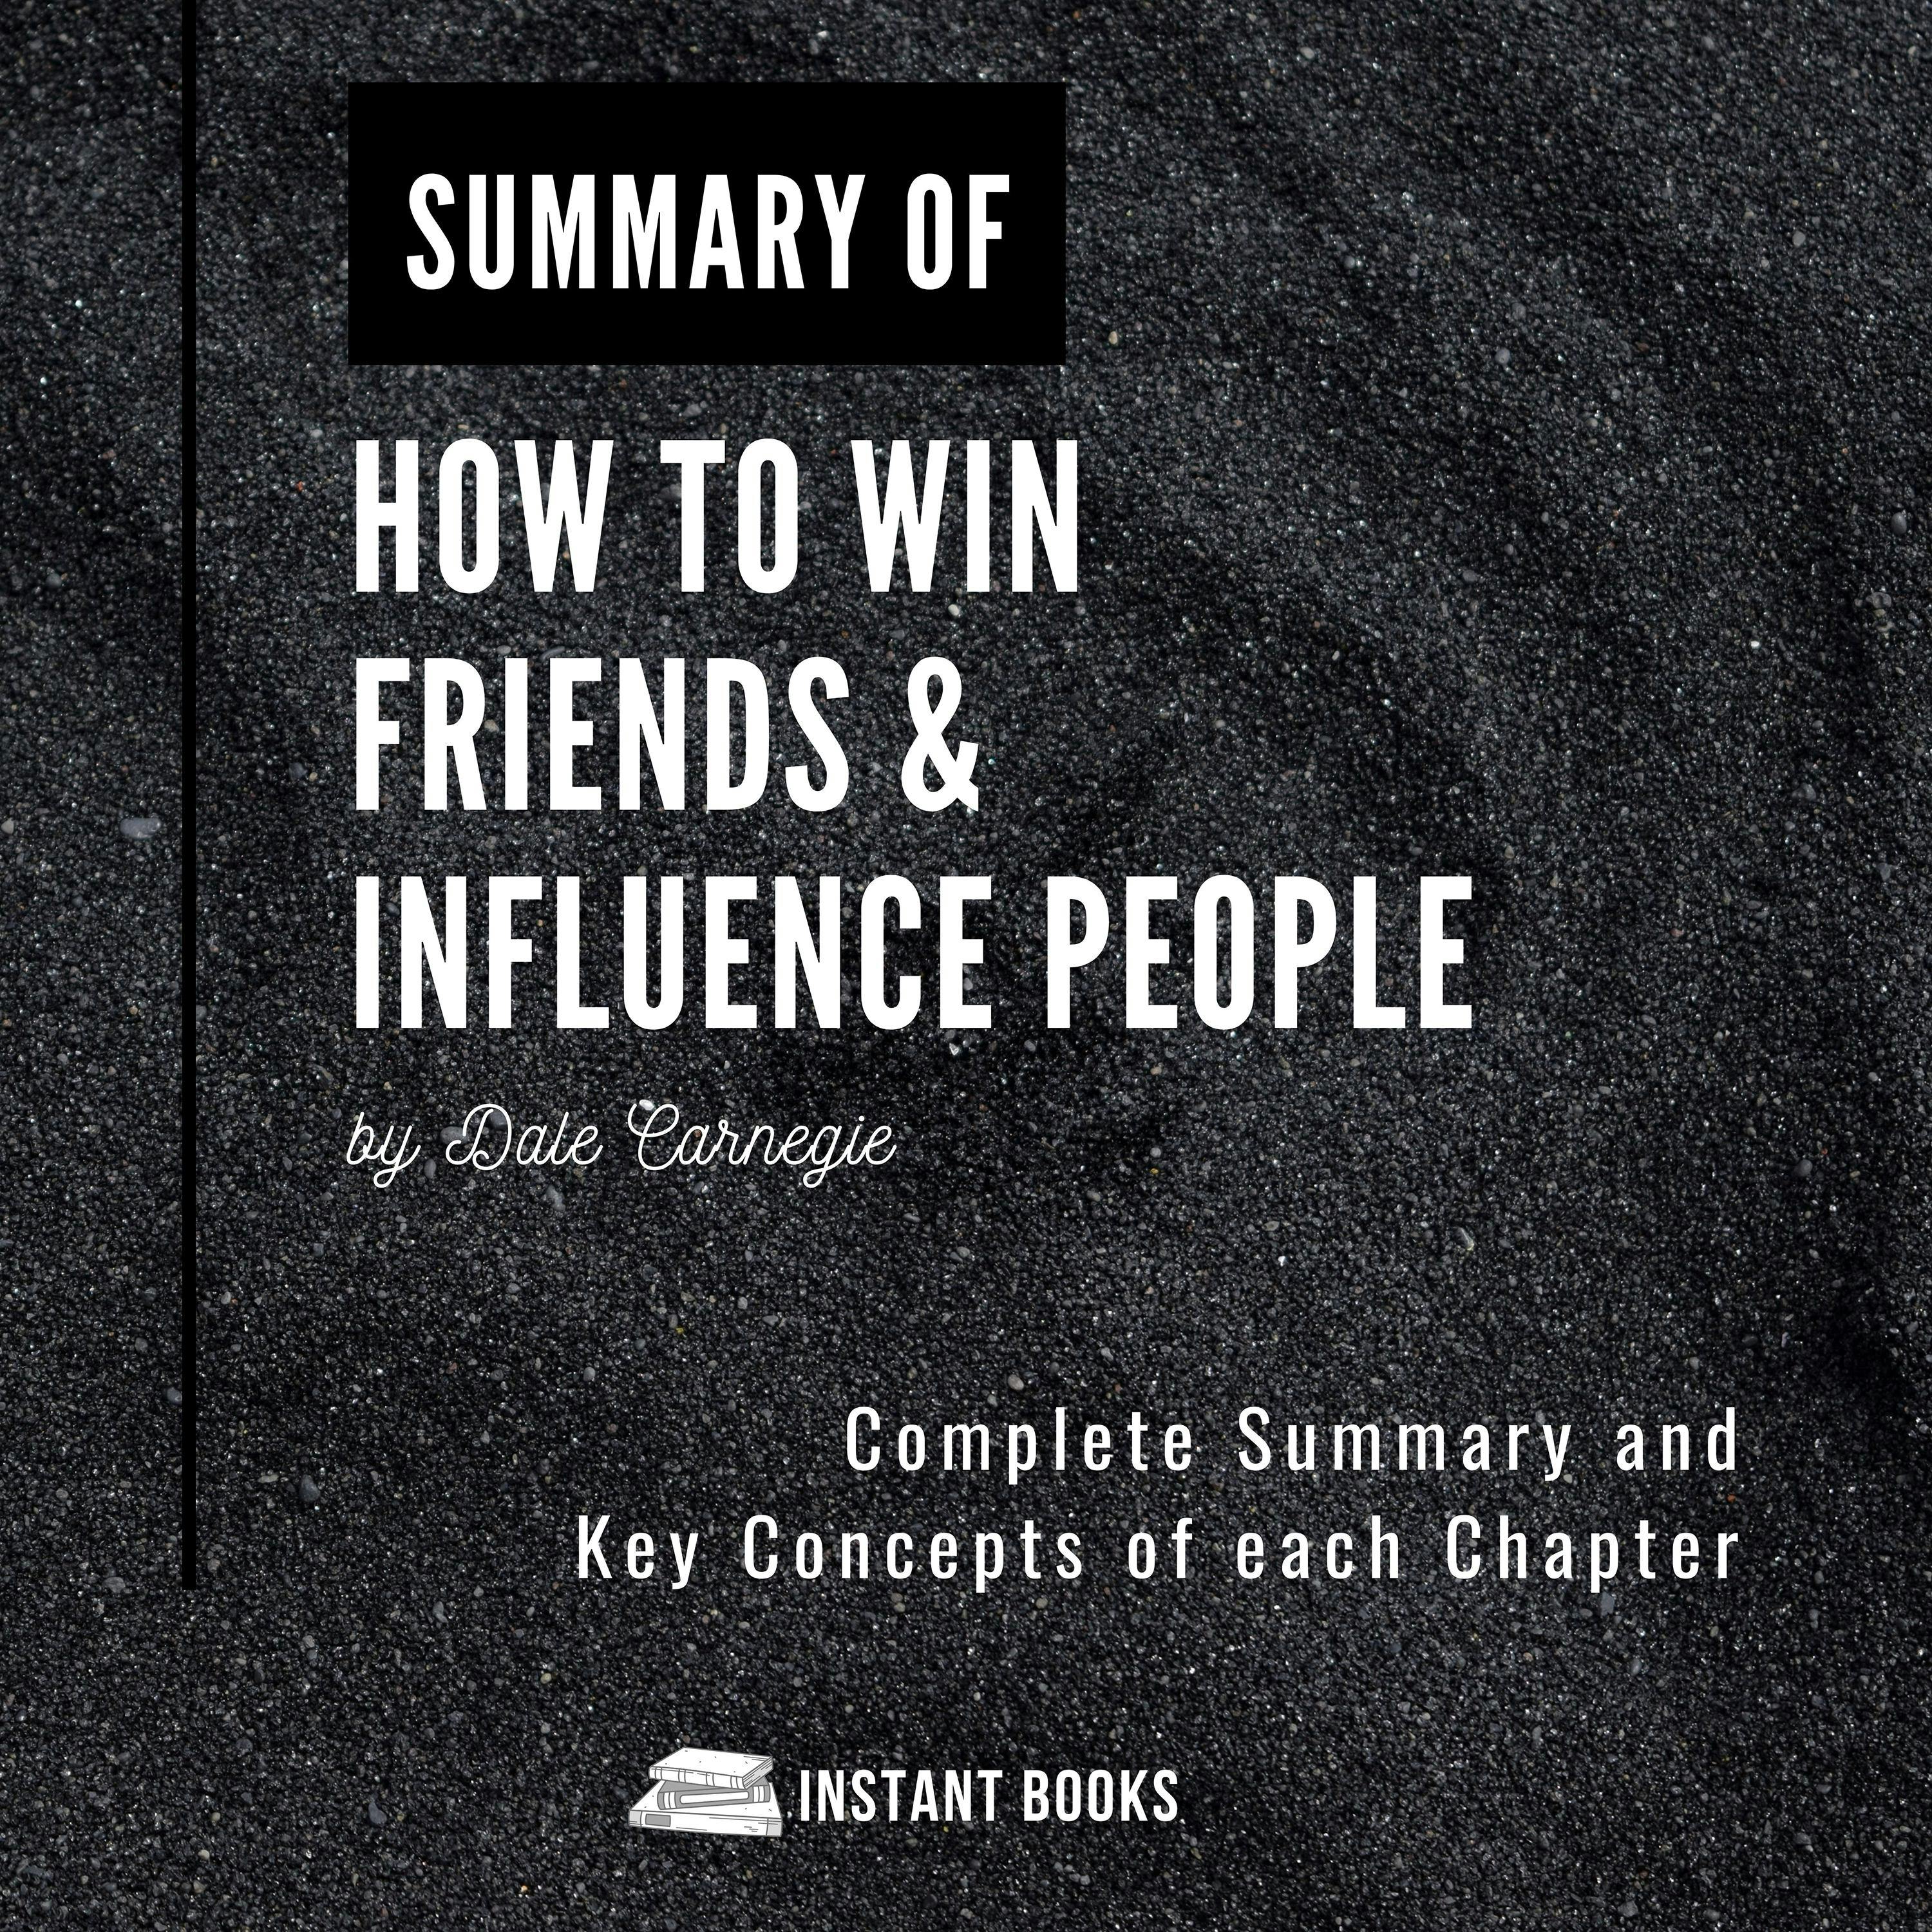 Summary of How to Win Friends & Influence People: by Dale Carnegie: Complete Summary and Key Concepts of each Chapter - undefined